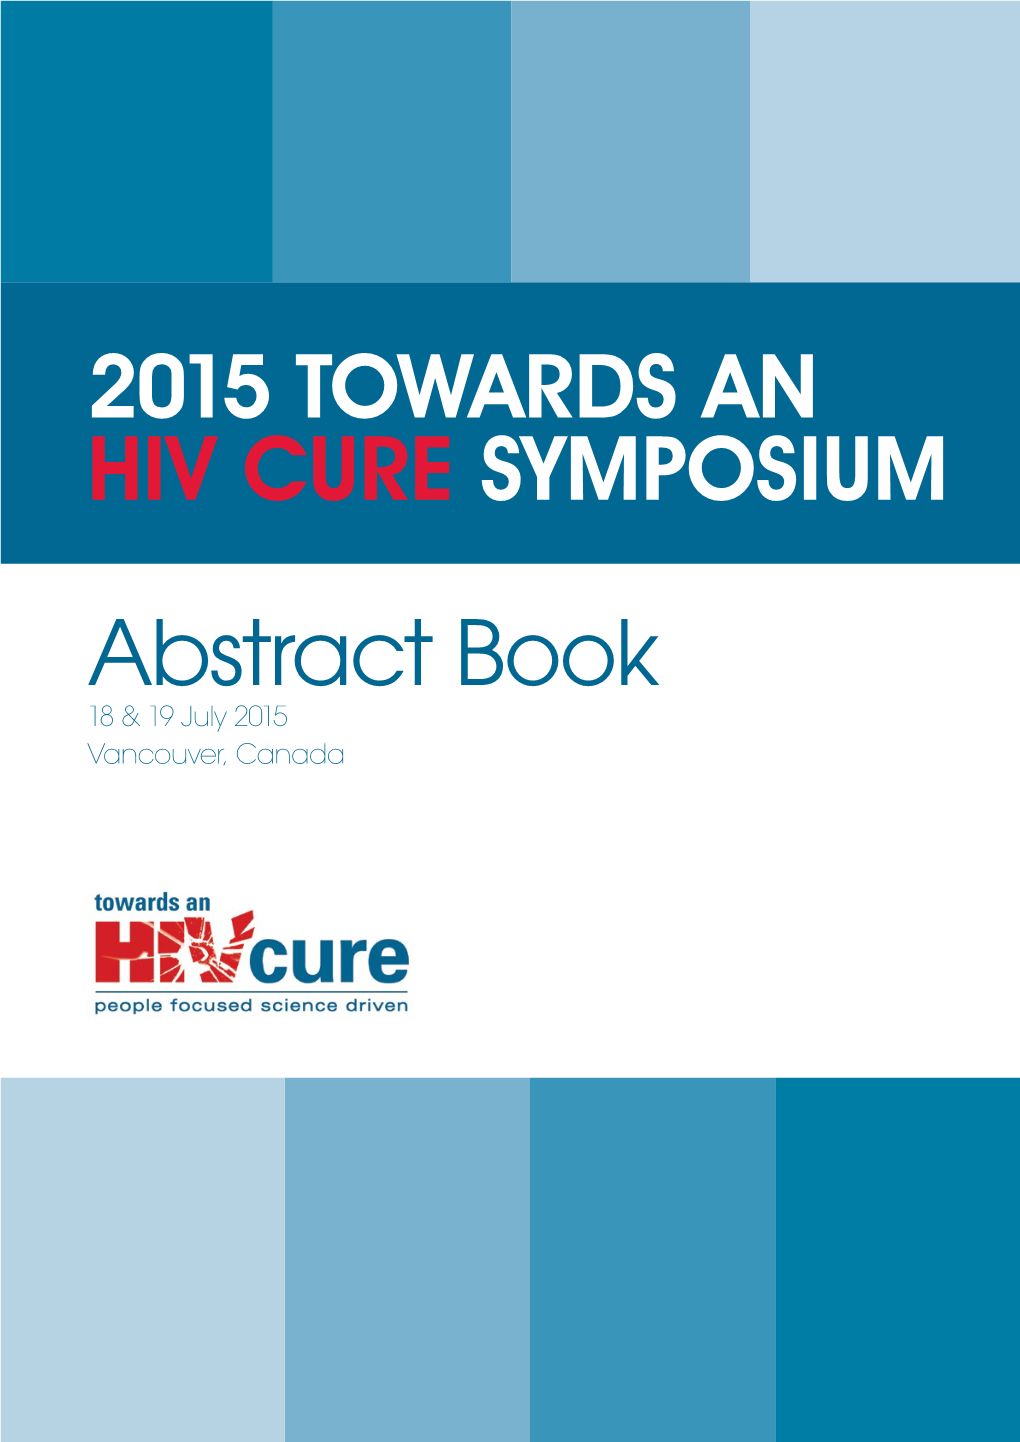 Abstract Book 18 & 19 July 2015 Vancouver, Canada 2015 Towards an HIV Cure Symposium Abstract Book